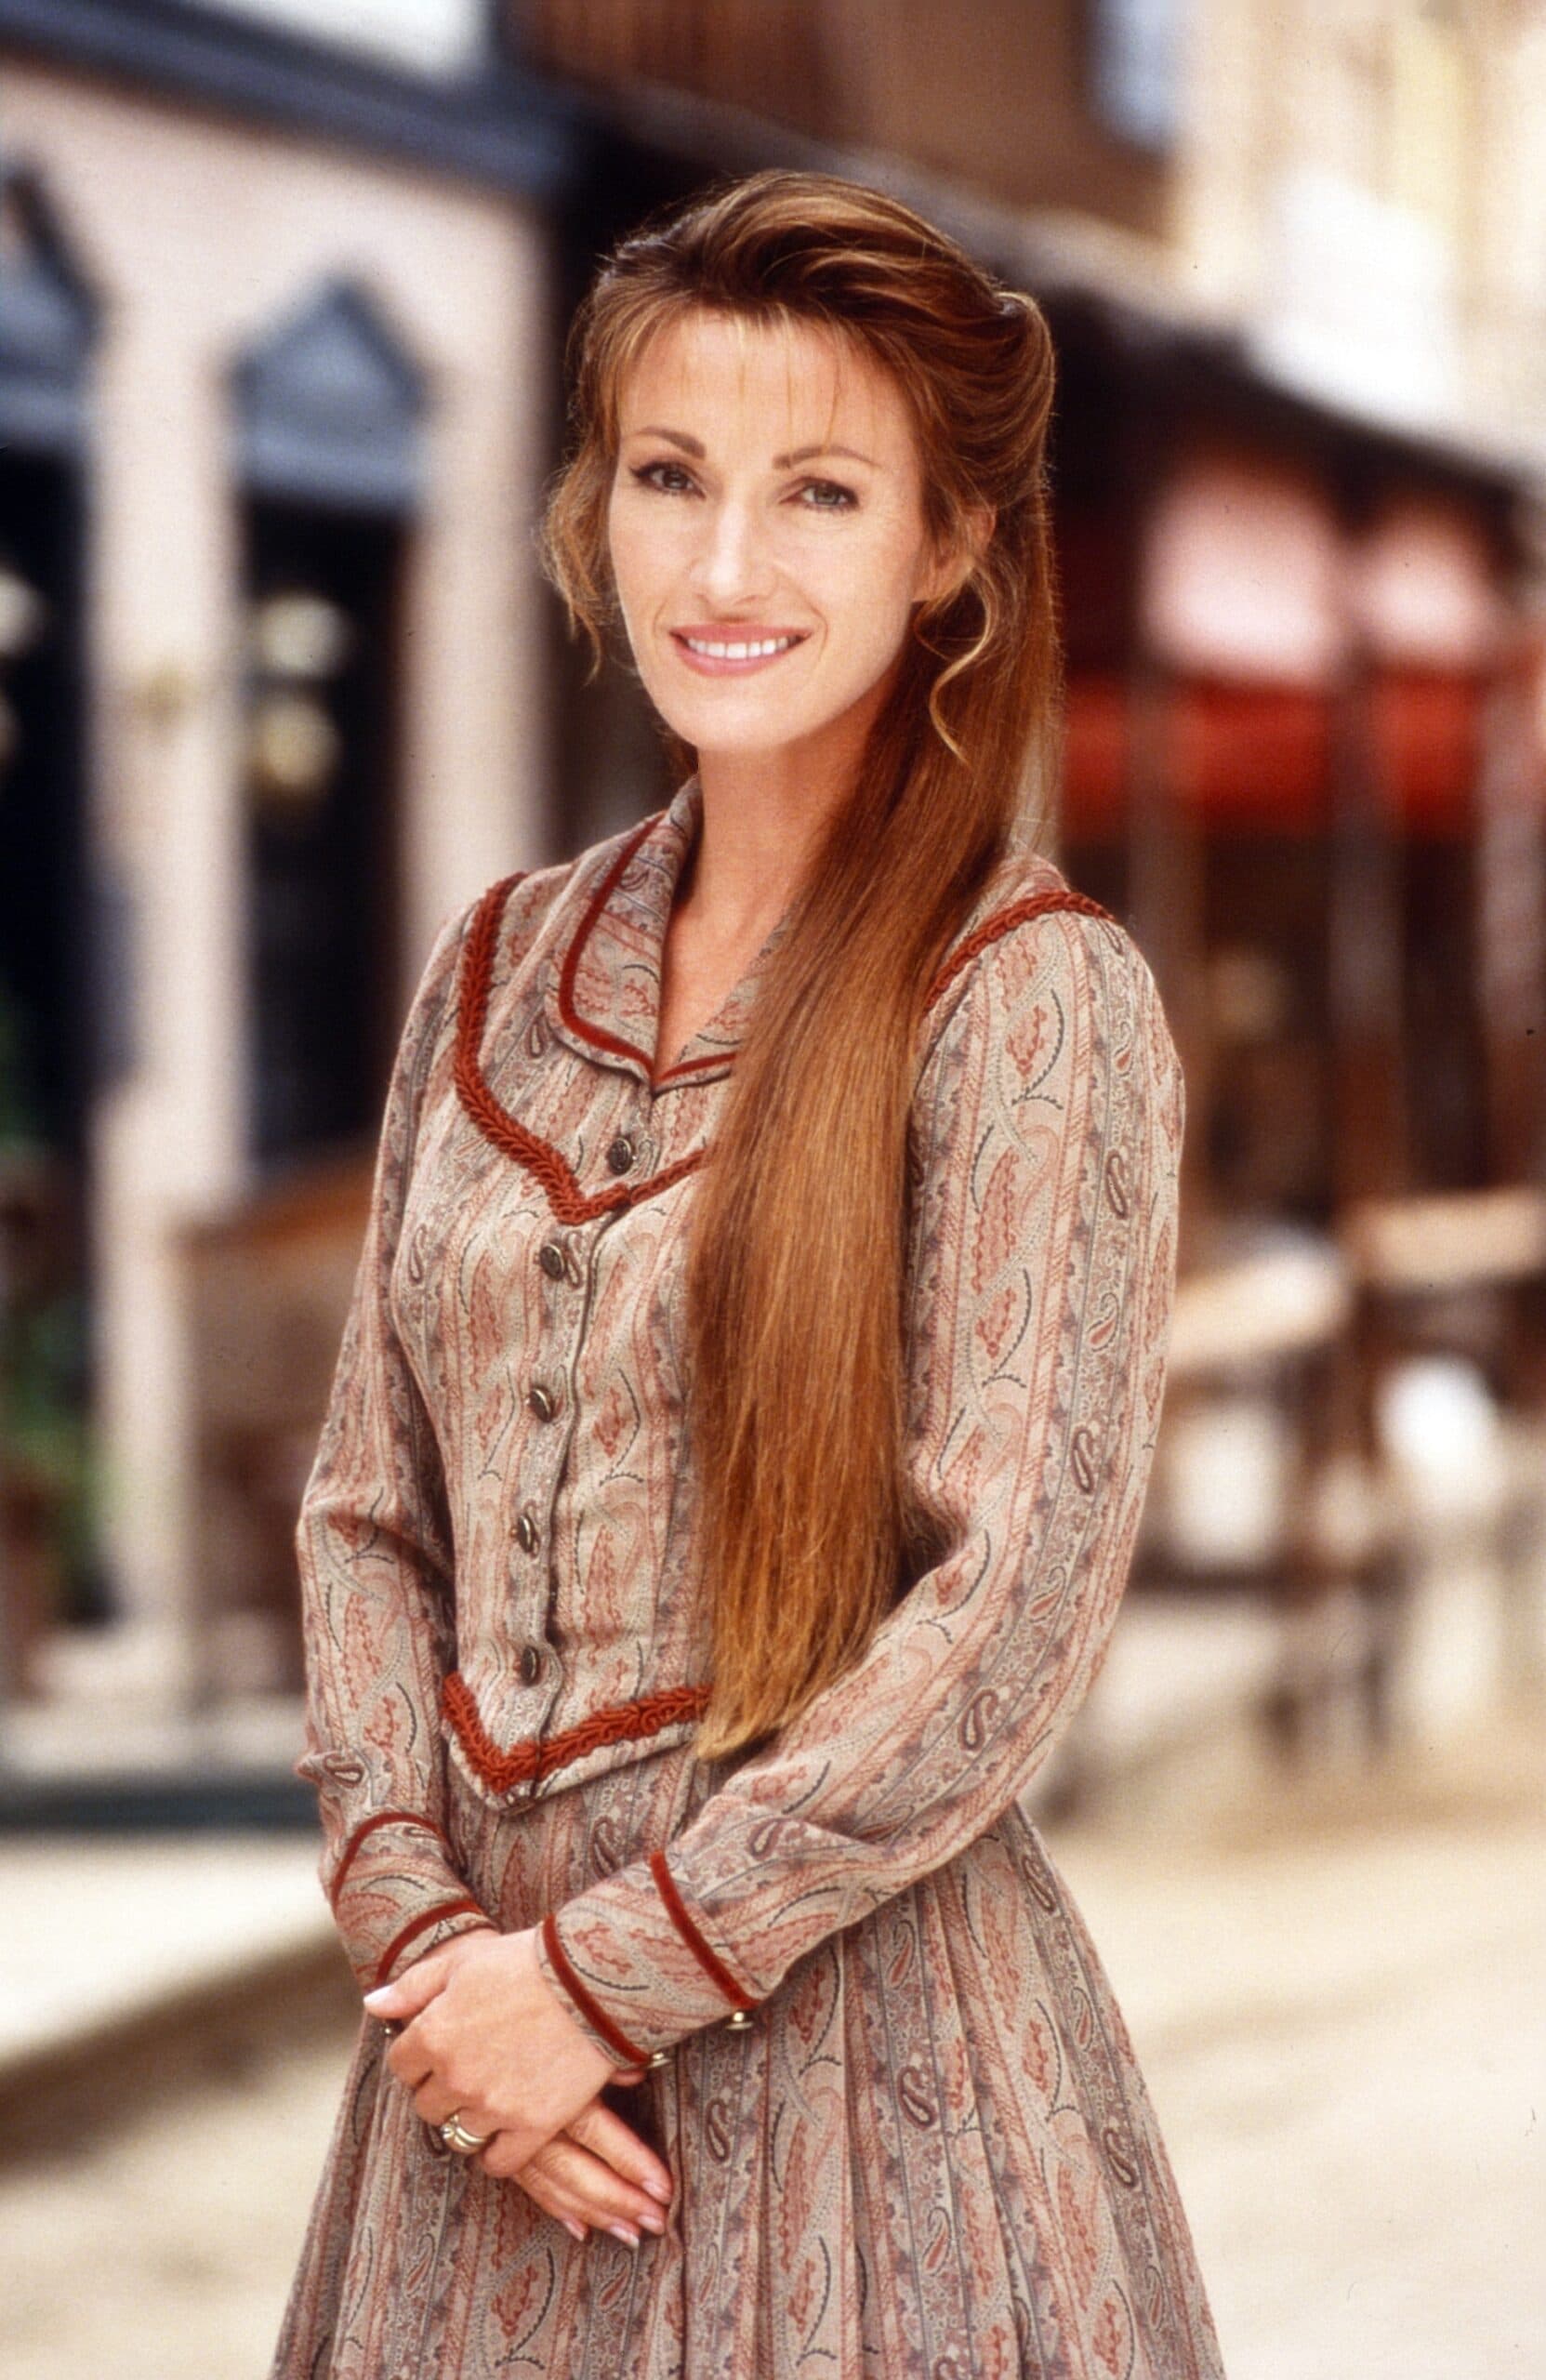 Jane Seymour Tells All On Financial And Personal Struggles During 'Dr. Quinn, Medicine Woman'